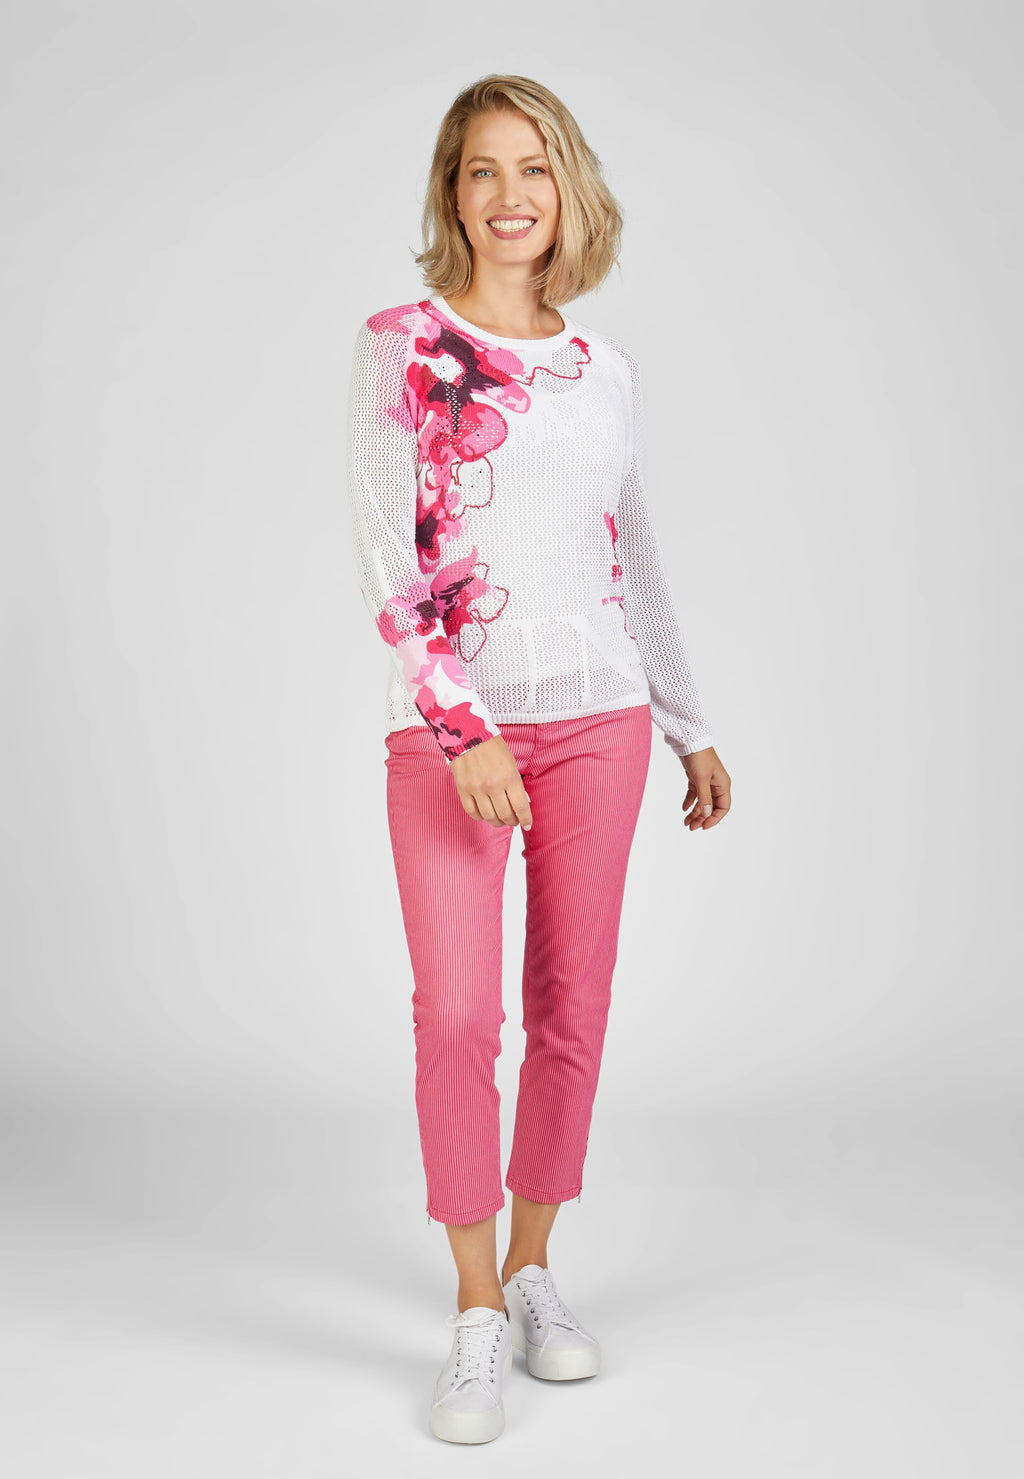 Rabe blossom up floral printed knit jumper in white, product code 52-222600